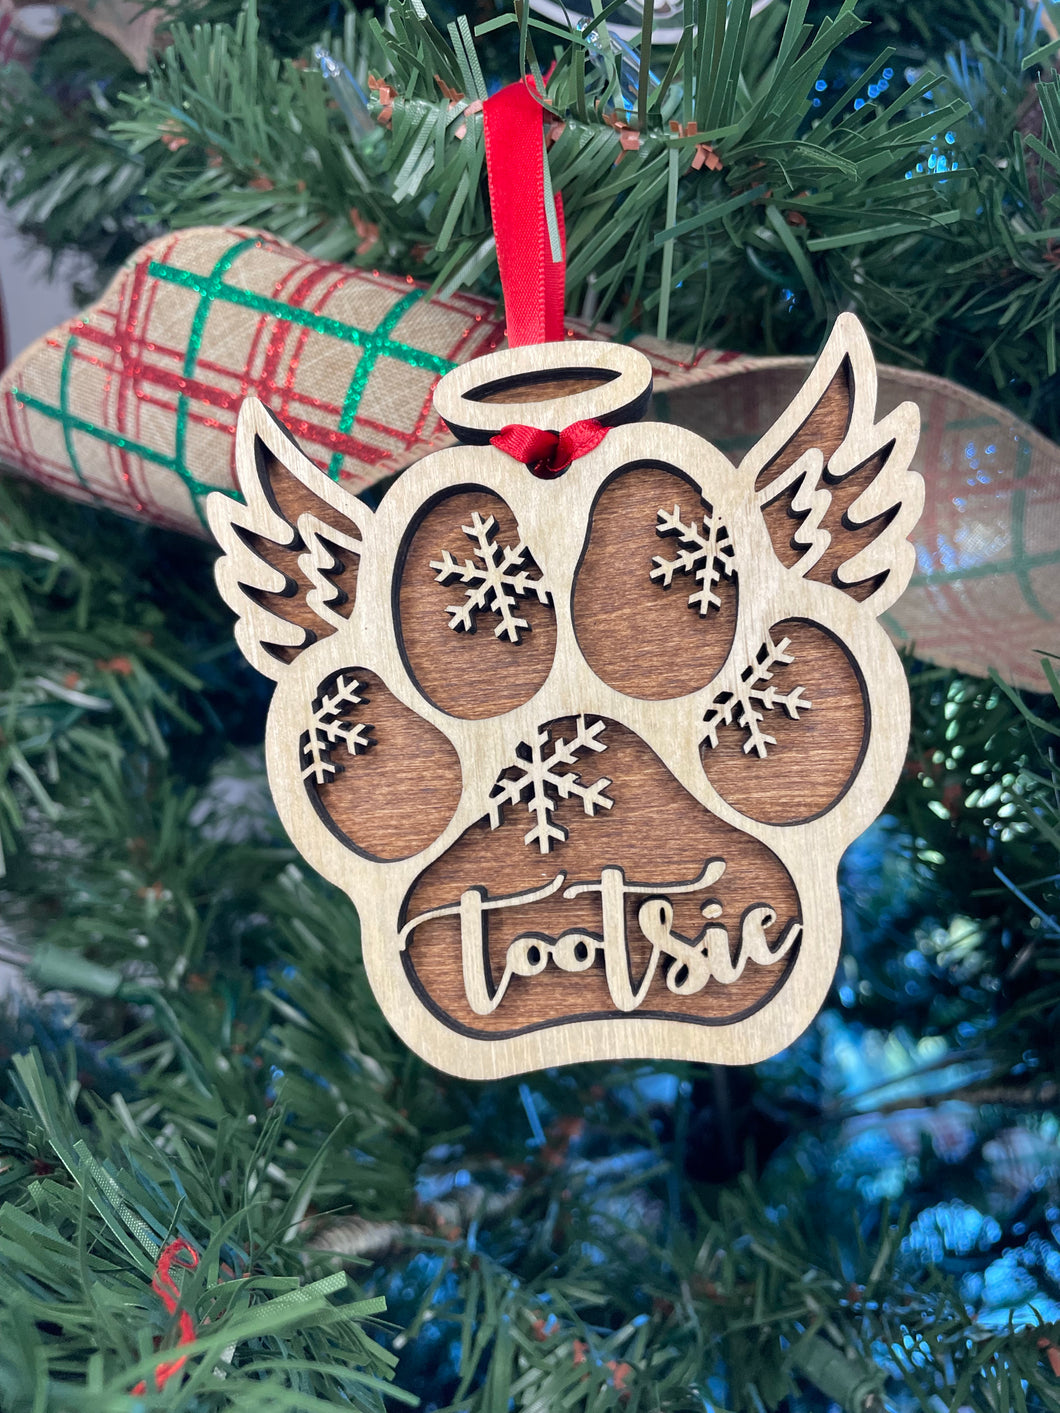 Dog Photo Christmas Ornament - Double Picture Pet Ornament - Paw Prints on  My Heart Ornament - Dog Memorial Ornament